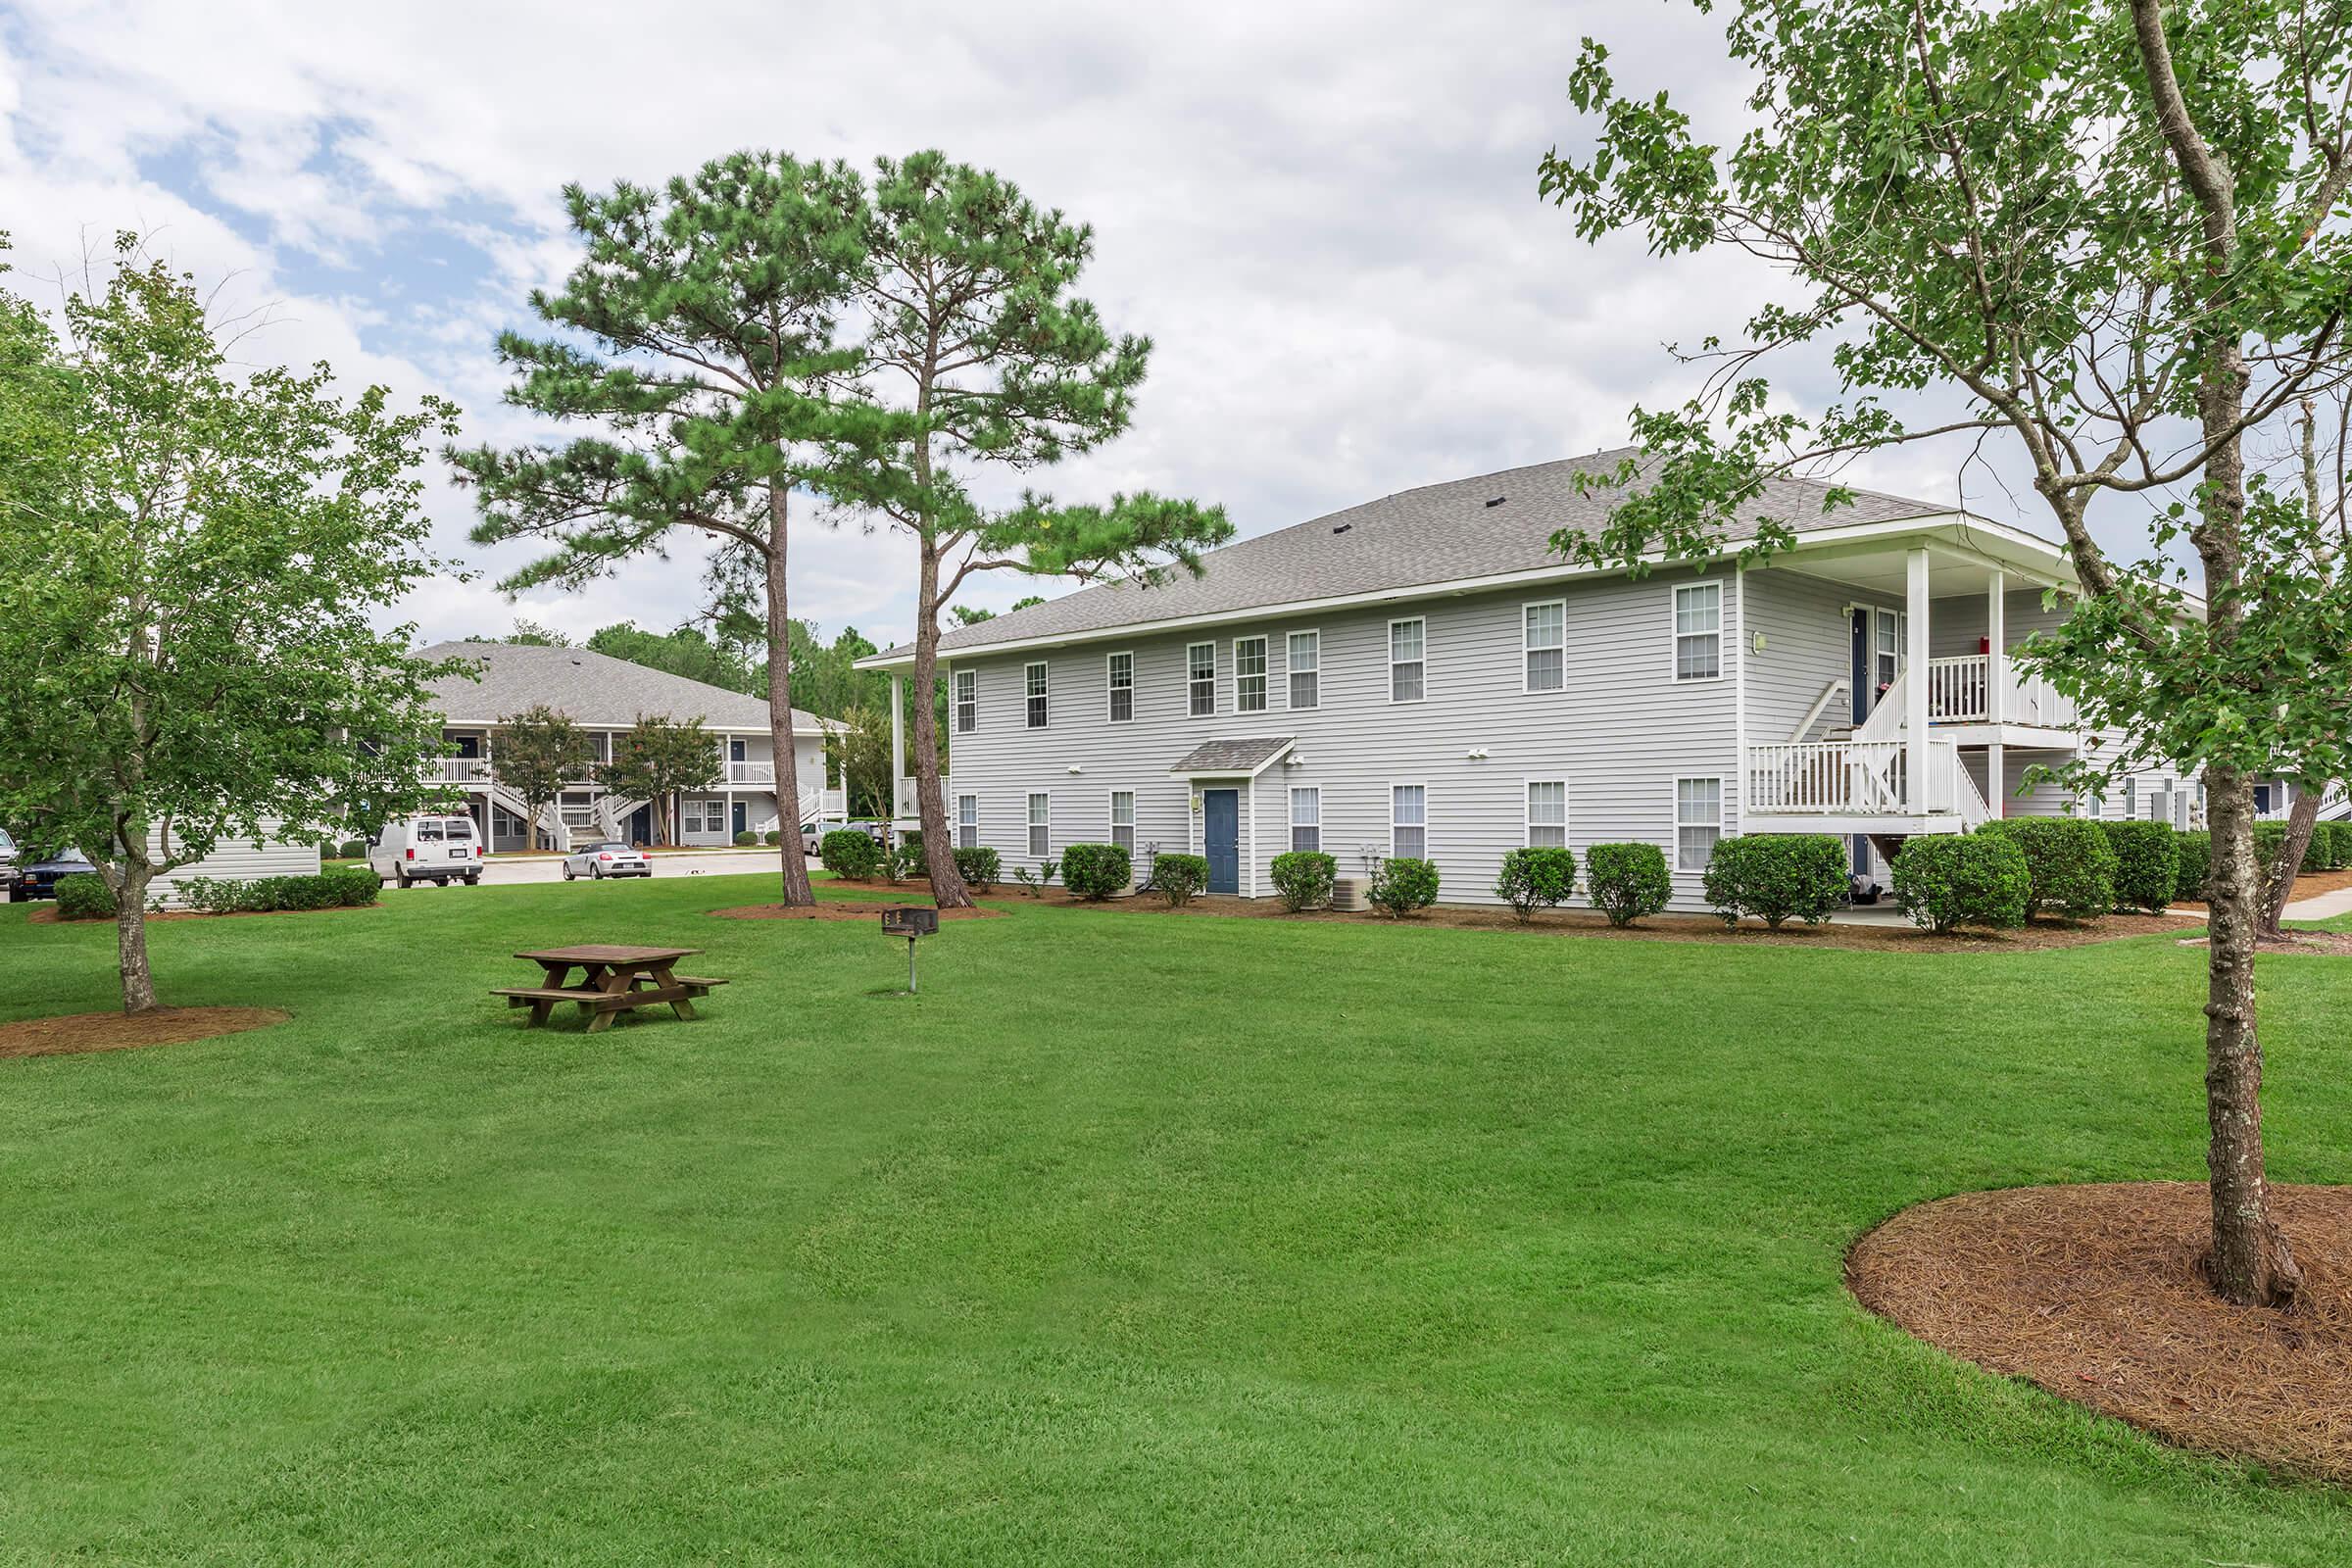 Plenty Of Room to Enjoy At Hampstead Place In Hampstead, NC